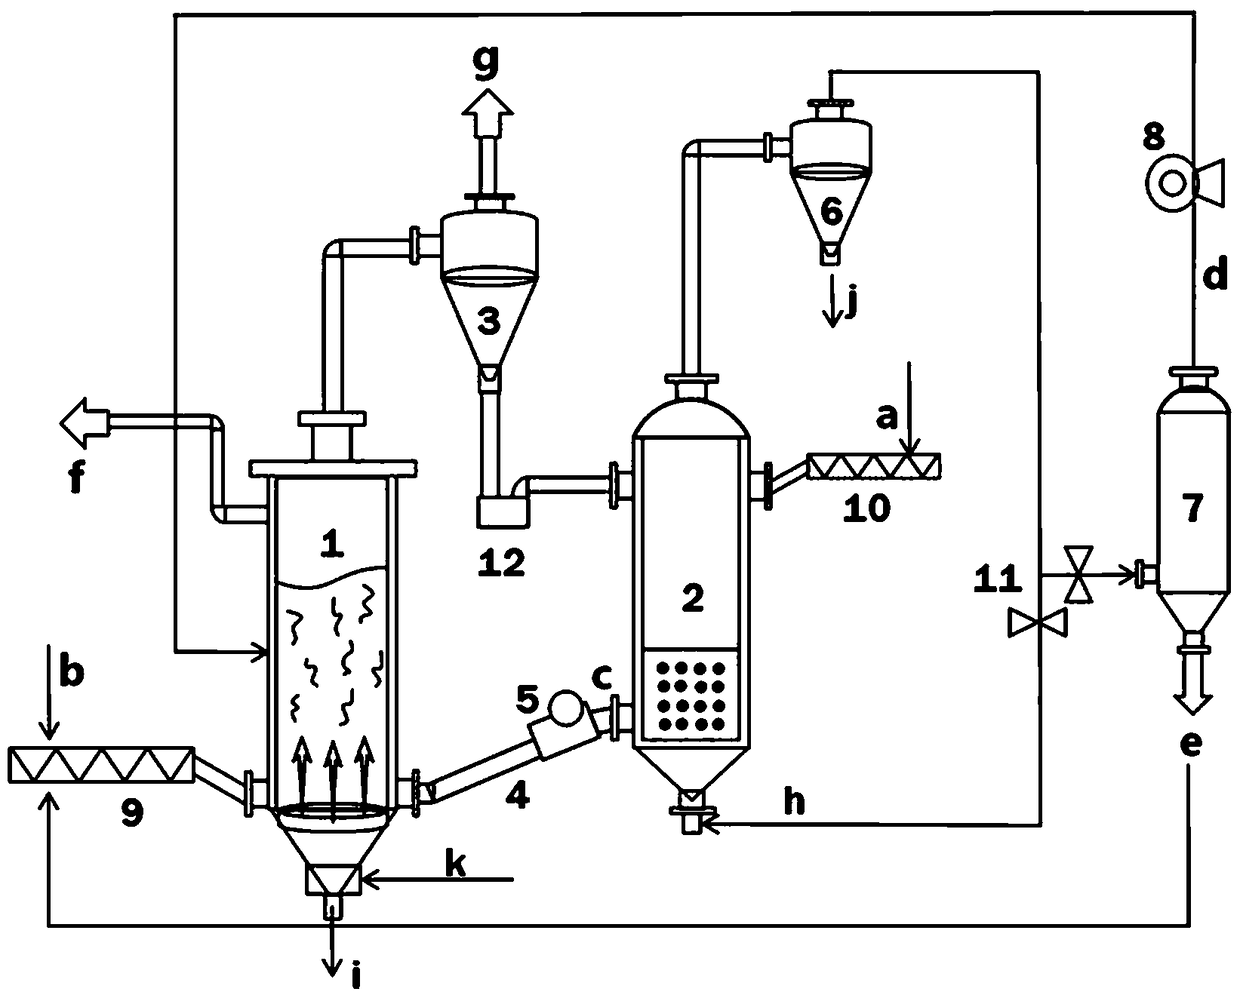 Electrical power generation system and method based on fire coal coupled household waste pyrolysis